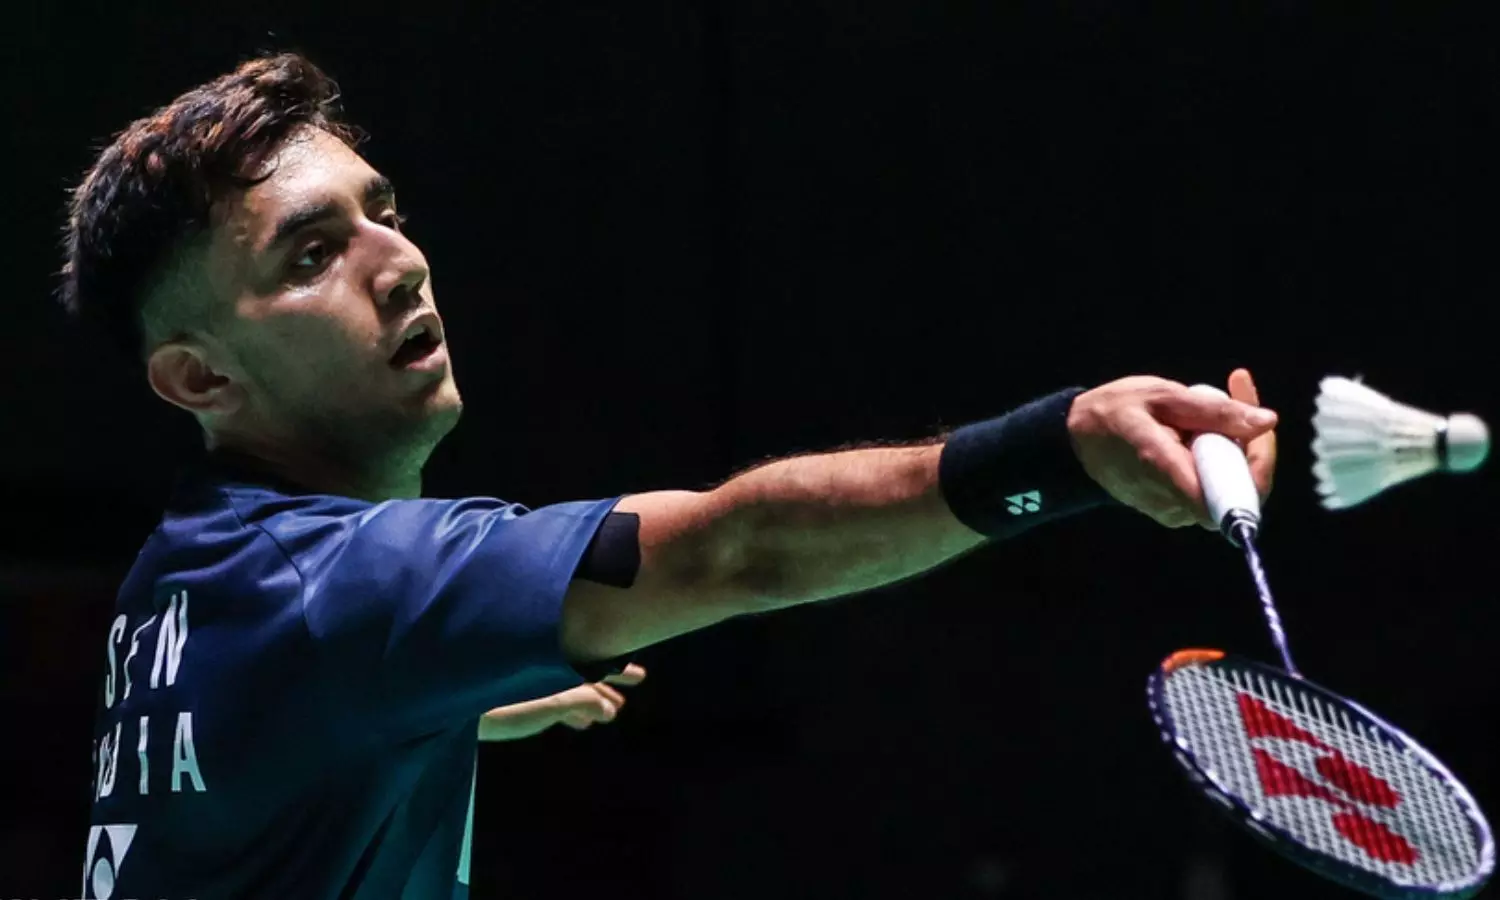 Hylo Open 2022 Preview, Indian shuttlers, Draws, Where to Watch, Live Stream